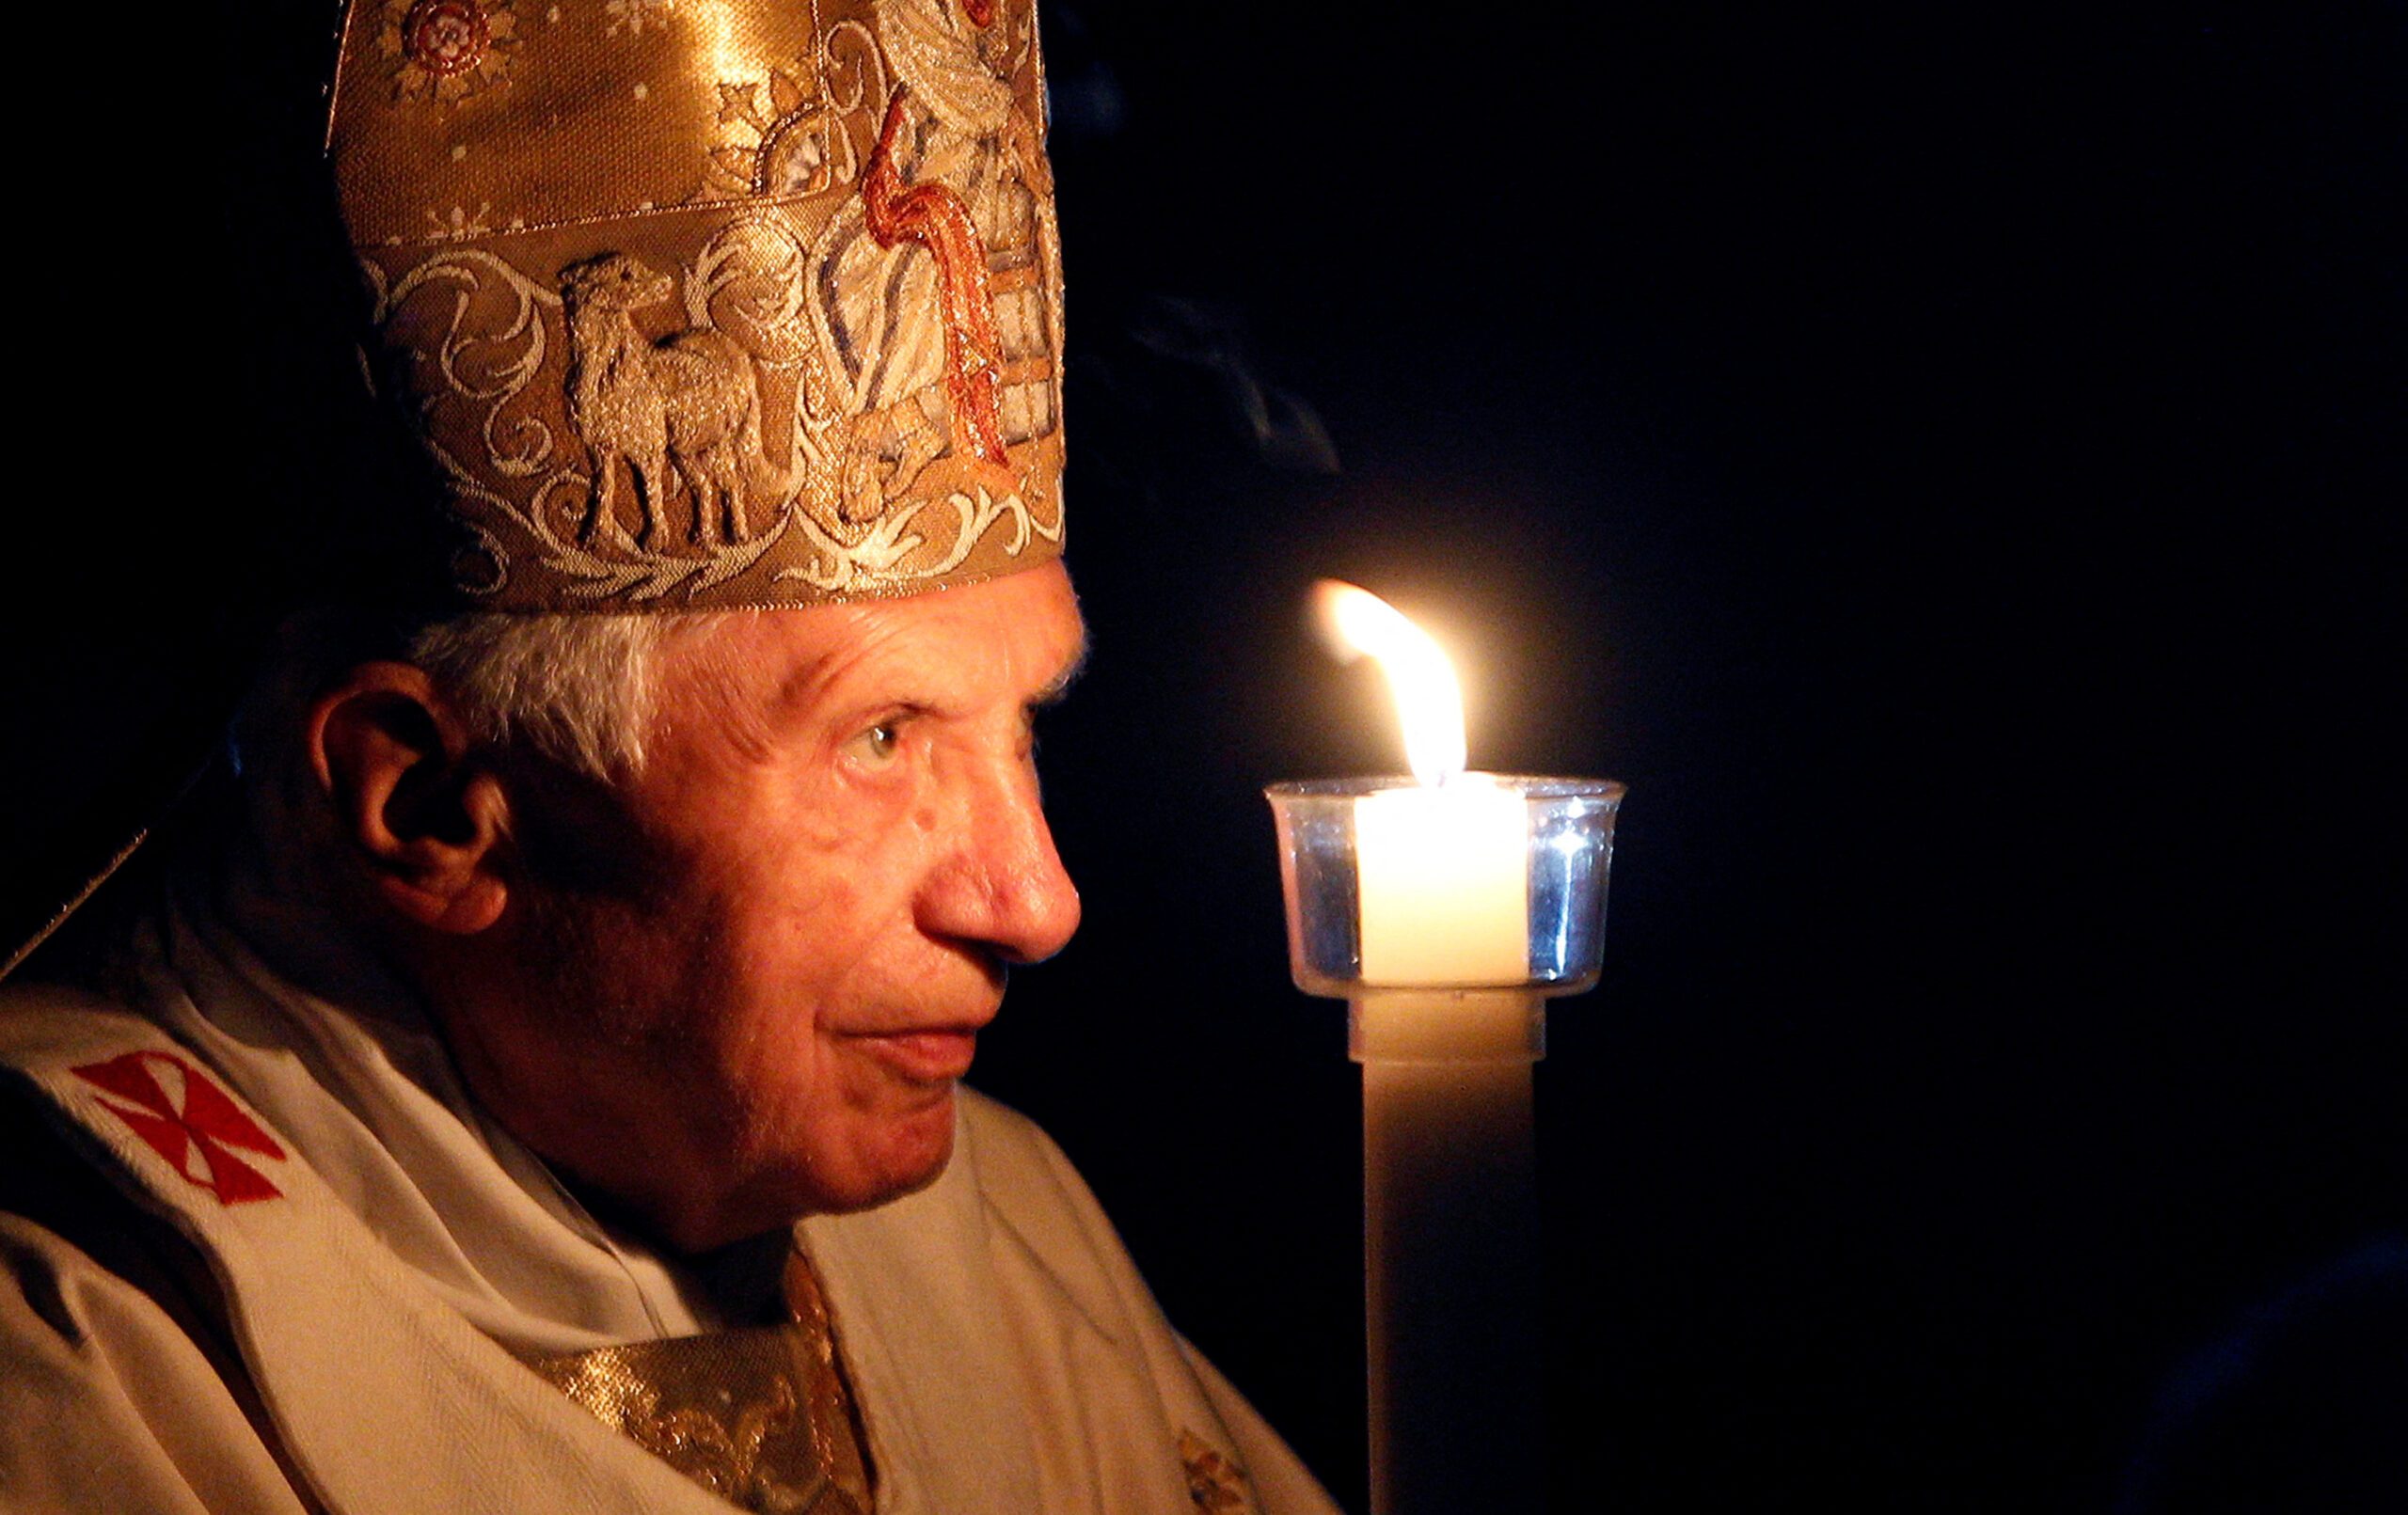 ‘One of the greatest theologians of his age’: Reactions to former pope Benedict’s death